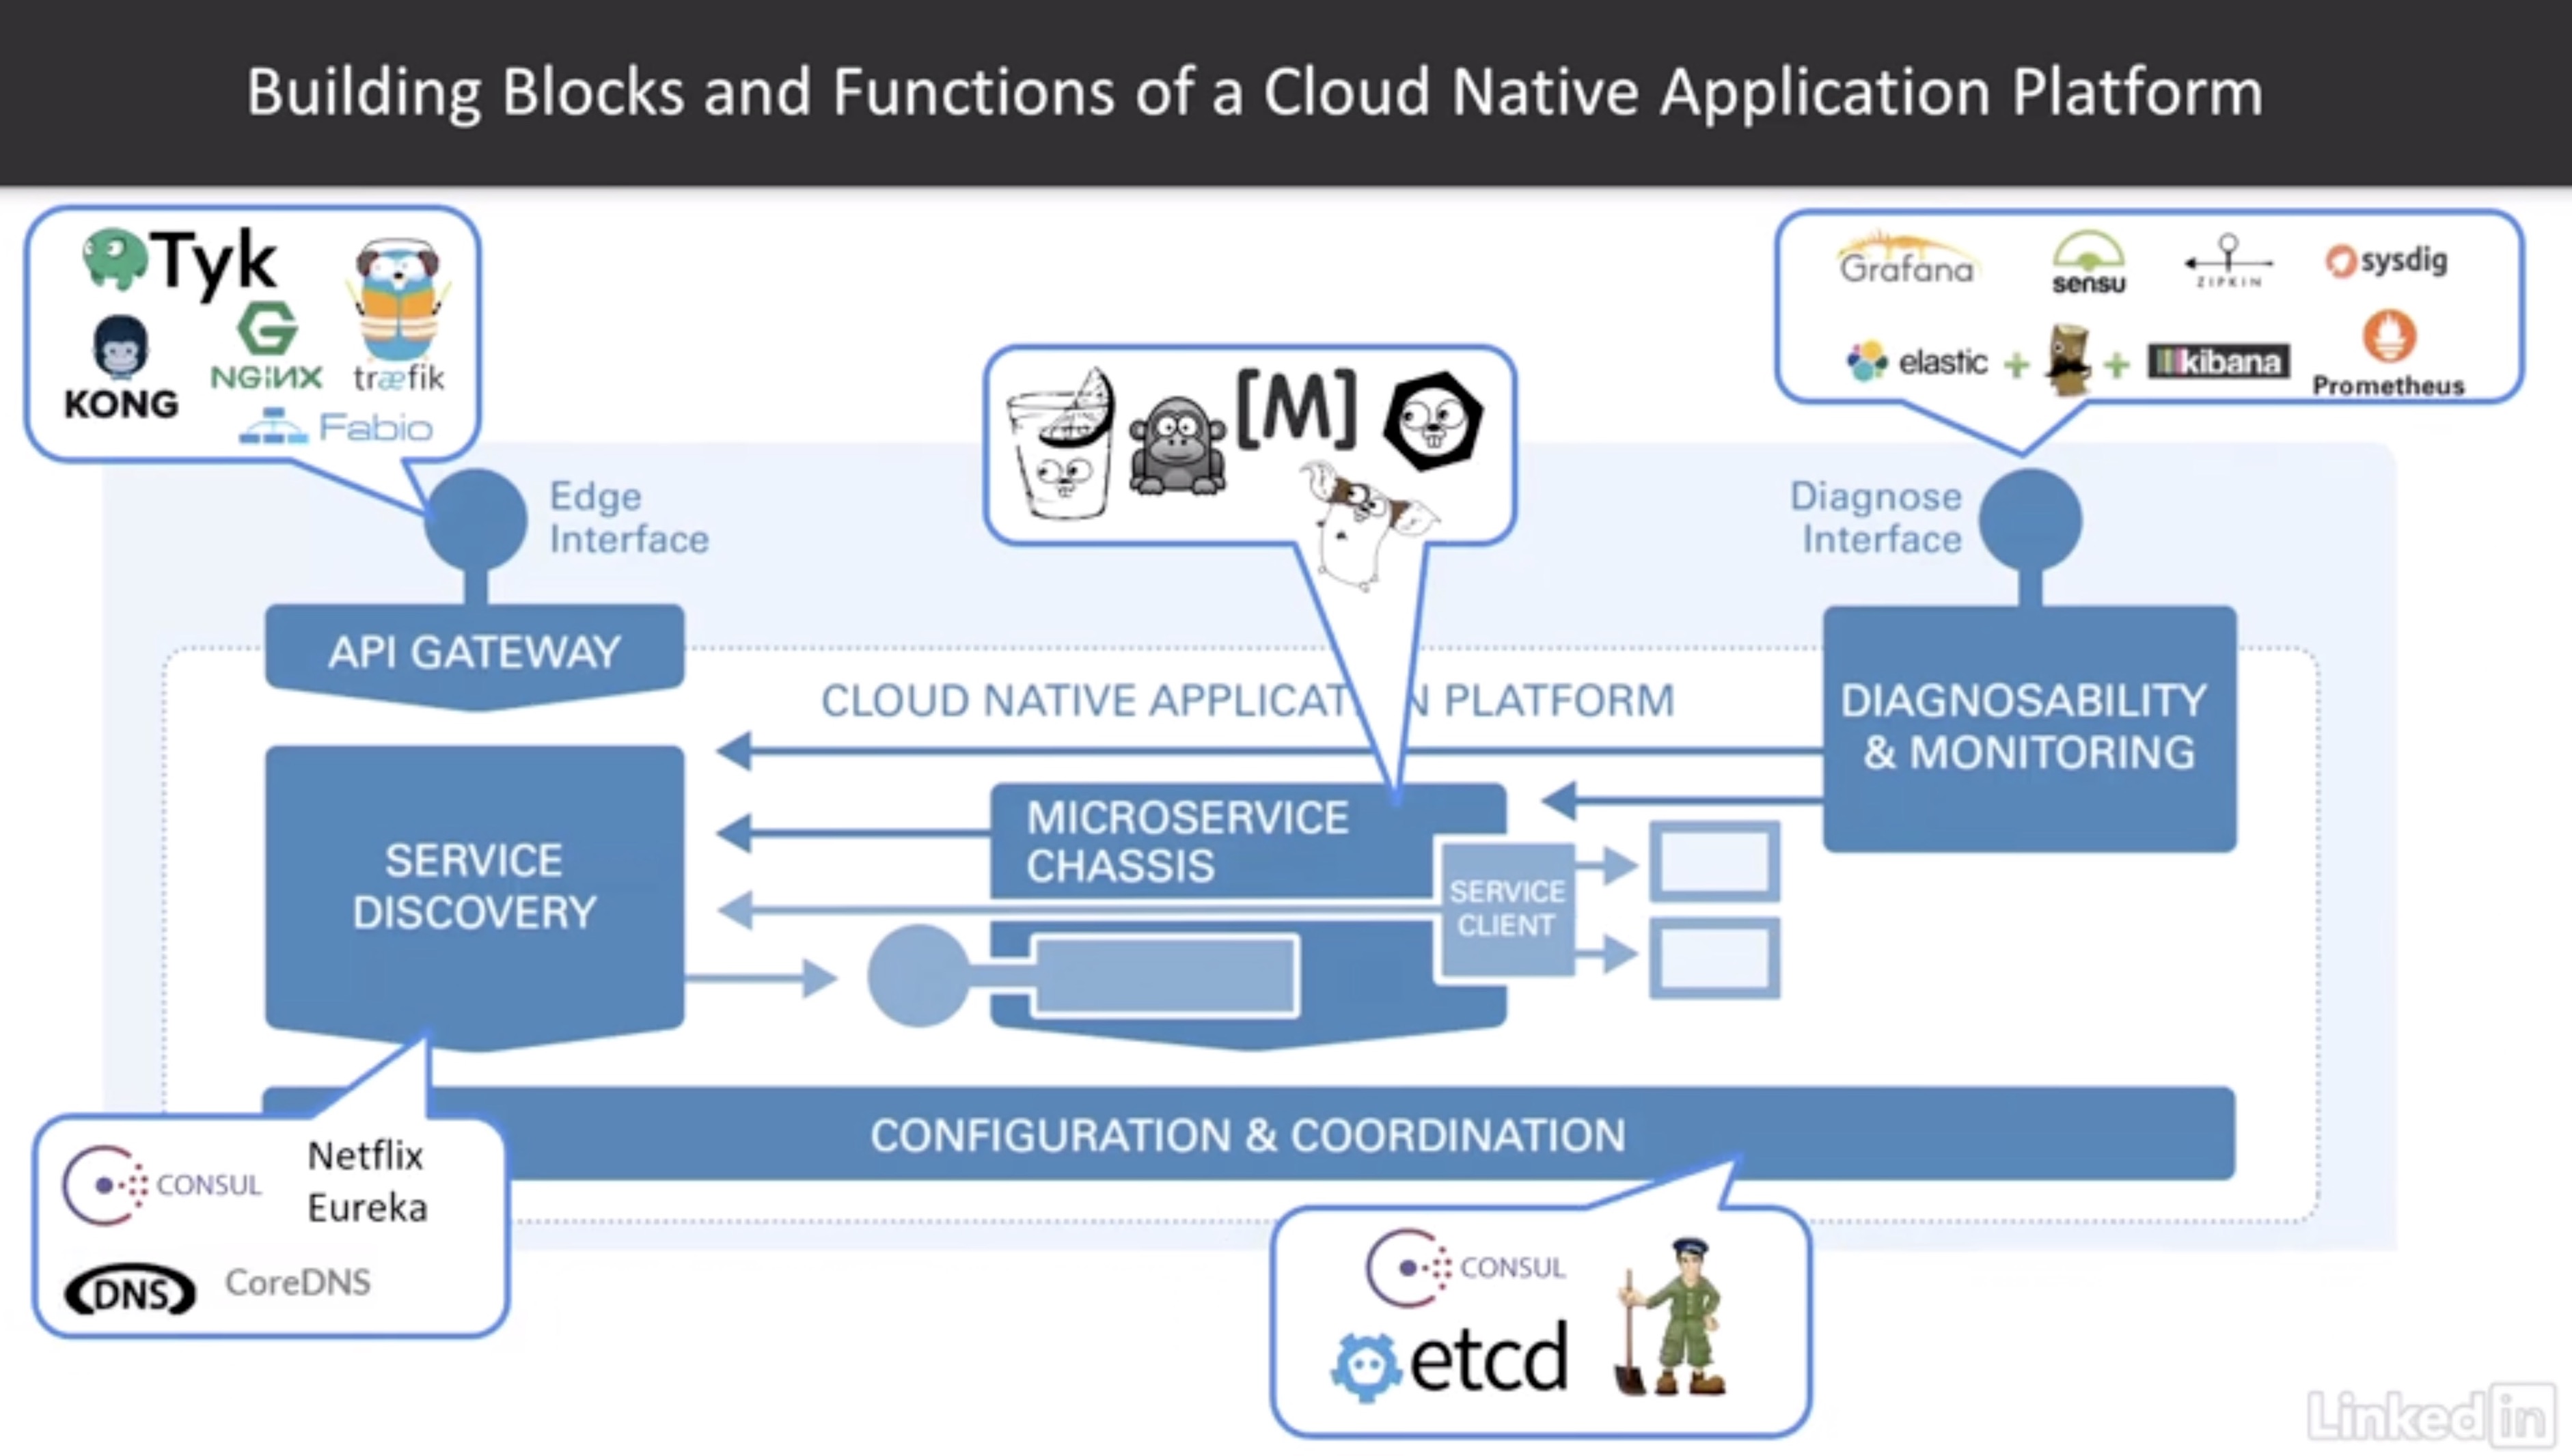 Building blocks and functions of a cloud native application platform